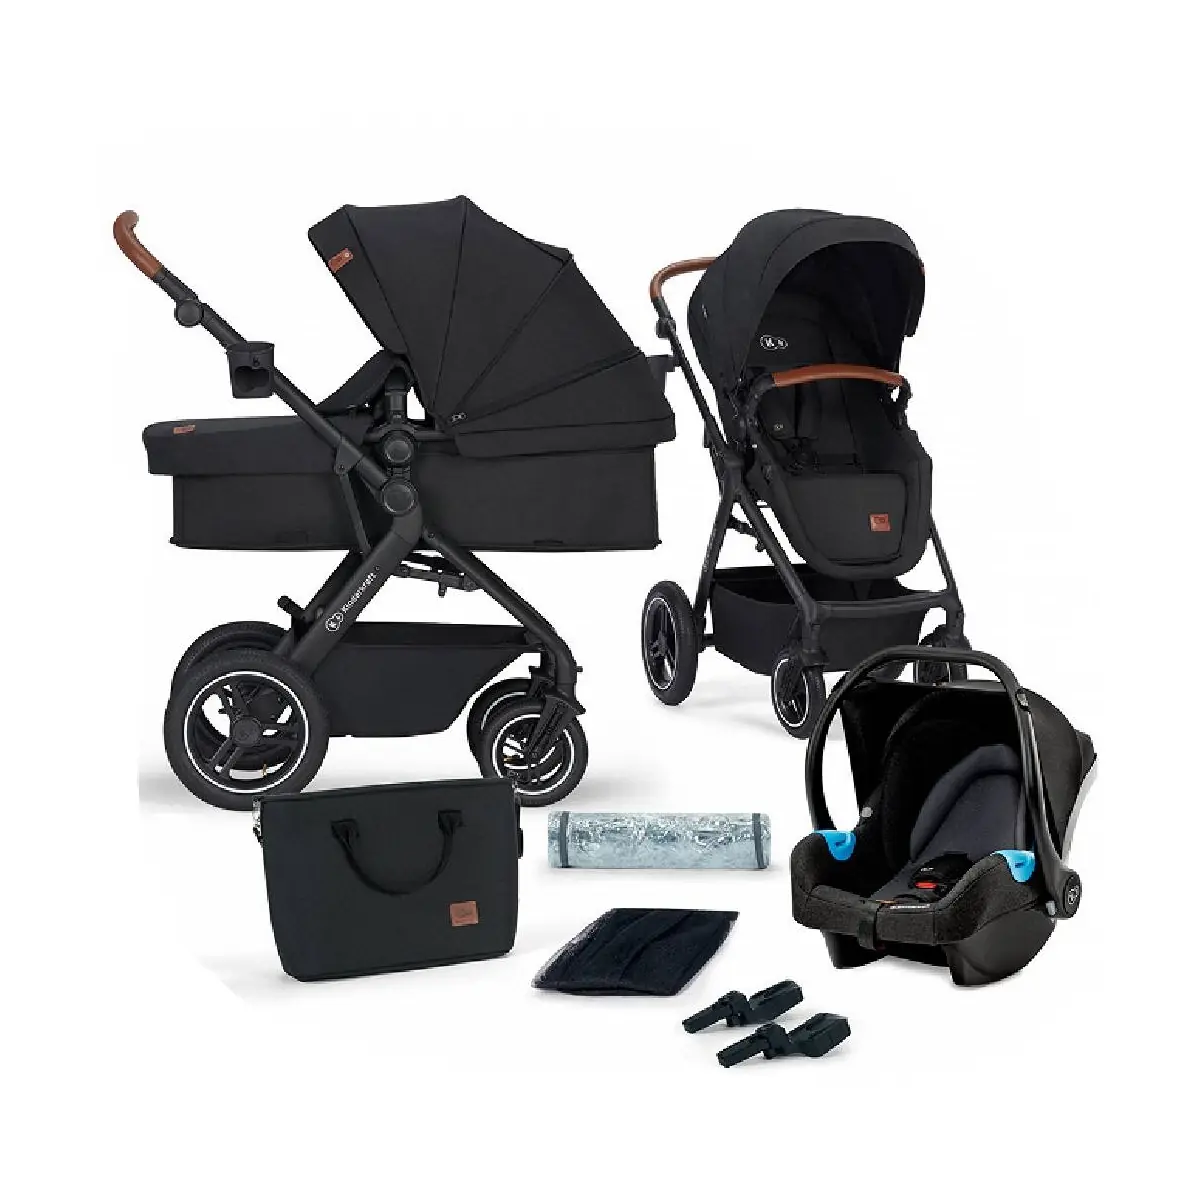 Kinderkraft B-Tour 3in1 With Mink Car Seat Travel System